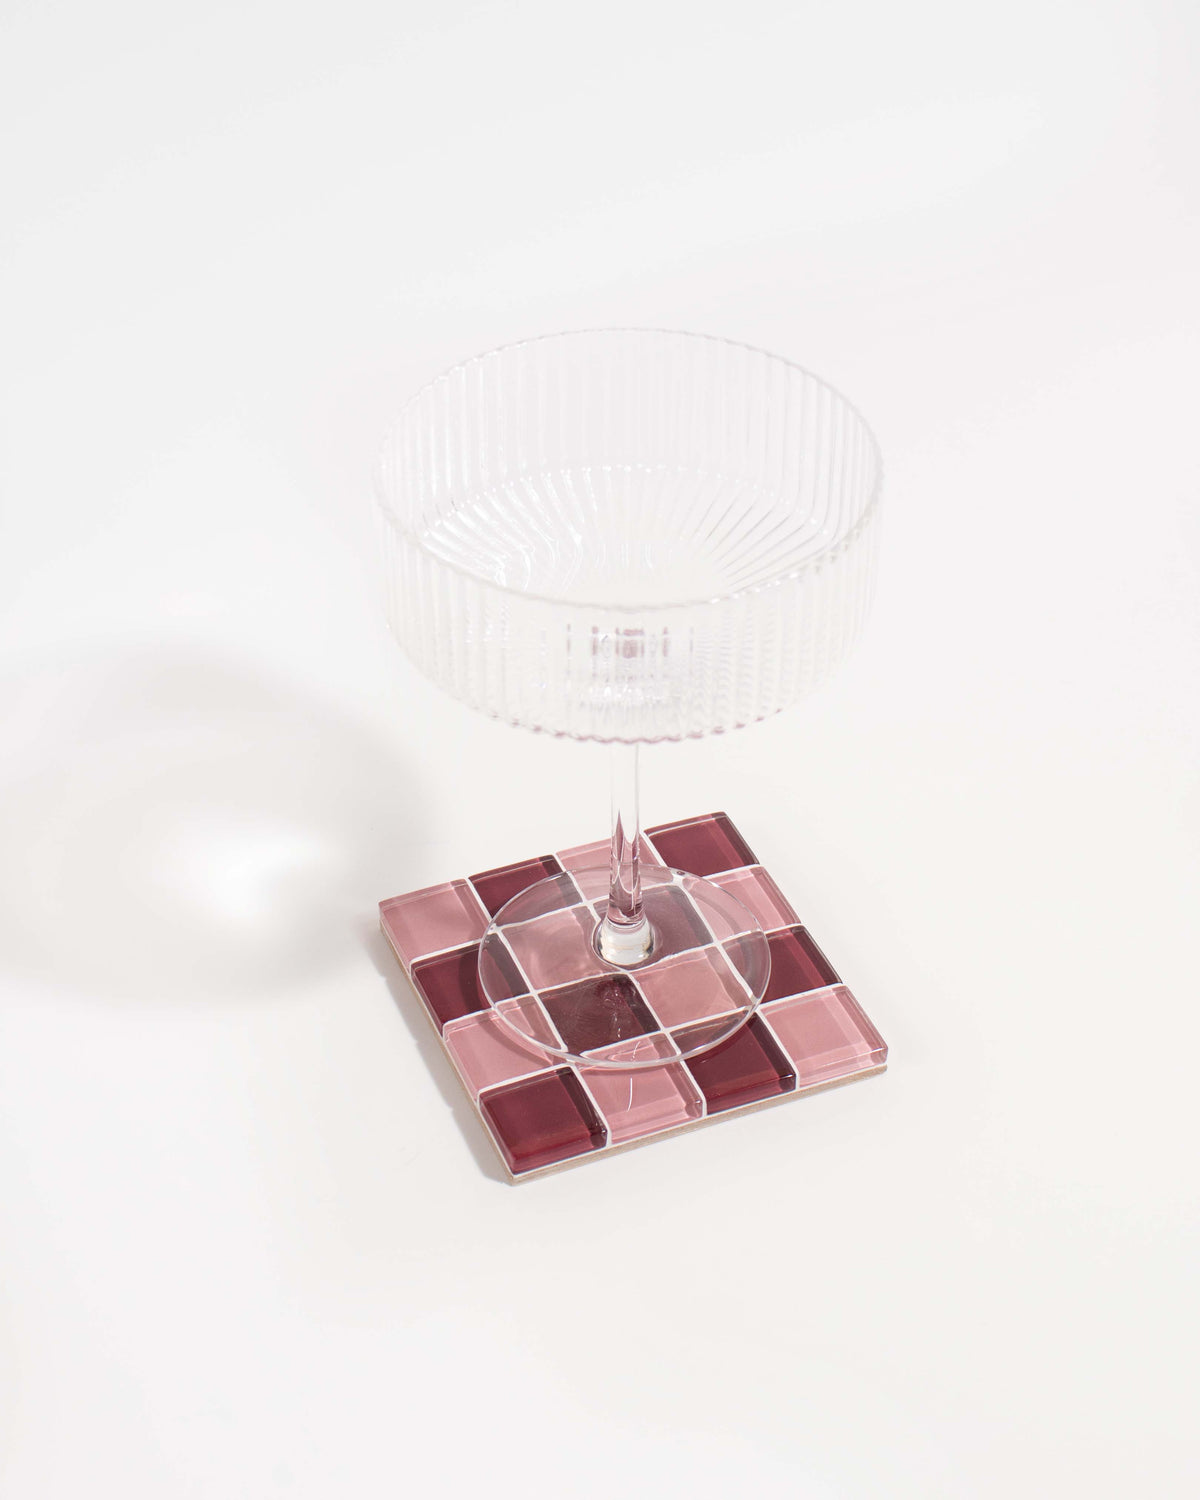 GLASS TILE COASTER - The Sweetest Love